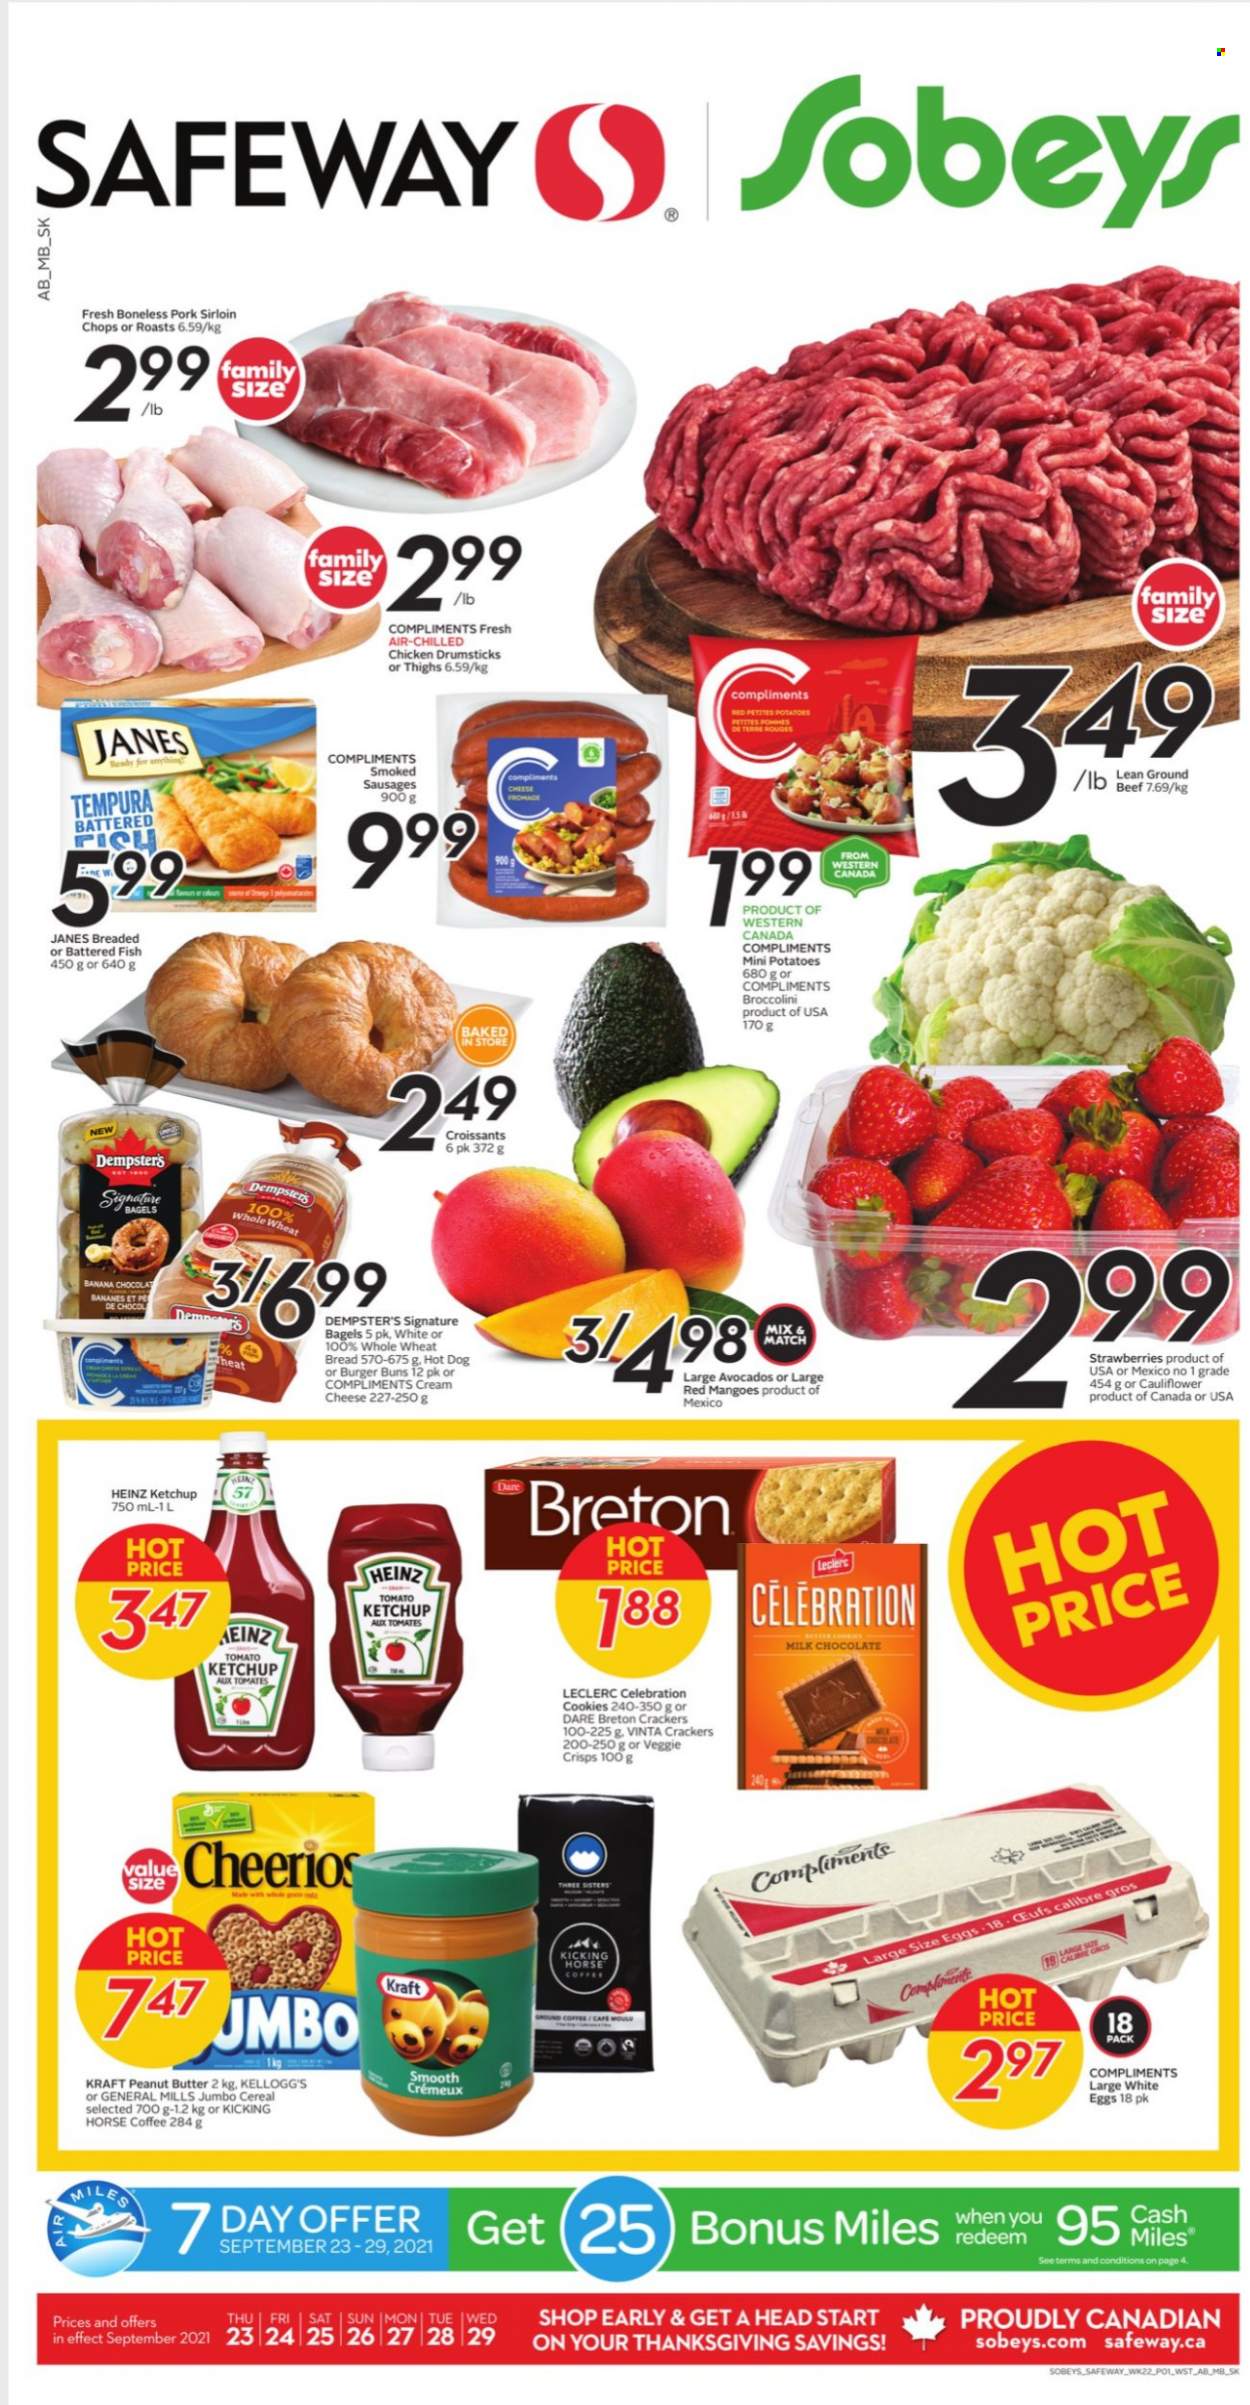 thumbnail - Safeway Flyer - September 23, 2021 - September 29, 2021 - Sales products - bagels, wheat bread, croissant, buns, burger buns, potatoes, broccolini, avocado, mango, fish, hot dog, Kraft®, sausage, cheese, eggs, cookies, milk chocolate, chocolate, Celebration, crackers, Kellogg's, Heinz, cereals, Cheerios, peanut butter, coffee, chicken drumsticks, chicken, beef meat, ground beef, pork loin, ketchup. Page 1.